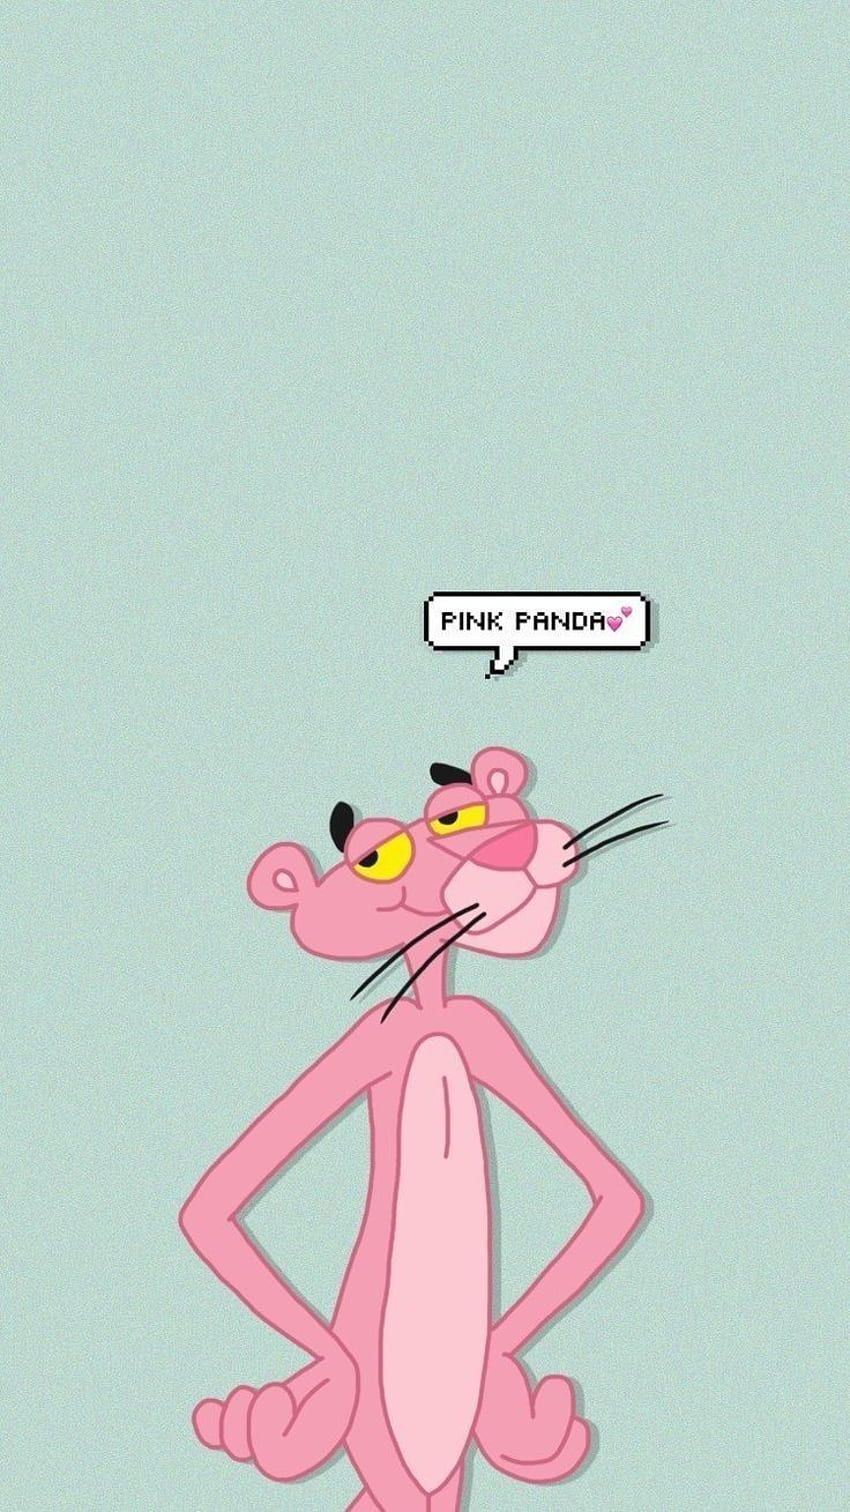 A pink cat with an open mouth and speech bubble - Pink Panther